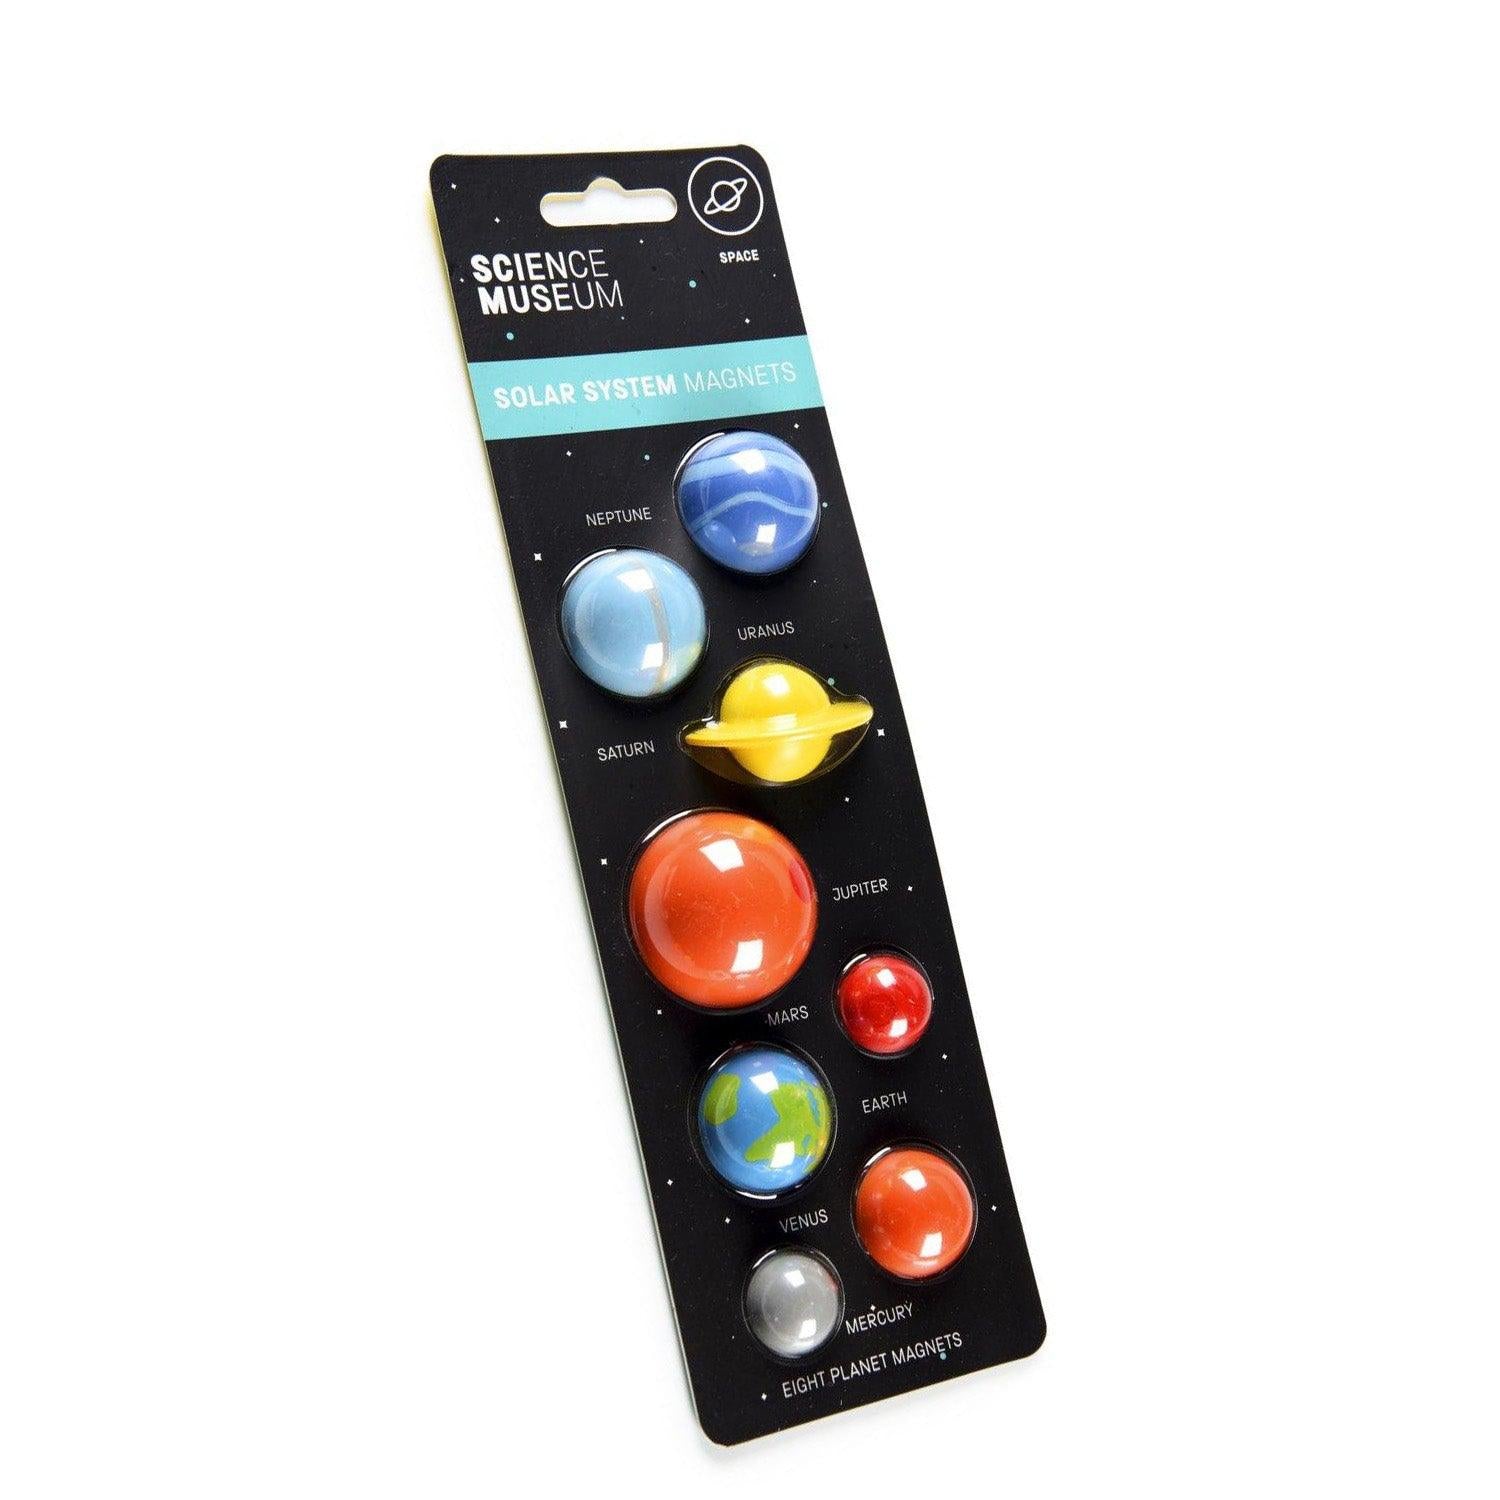 Science Museum Solar System Magnets - Other Stationery - Science Museum Shop